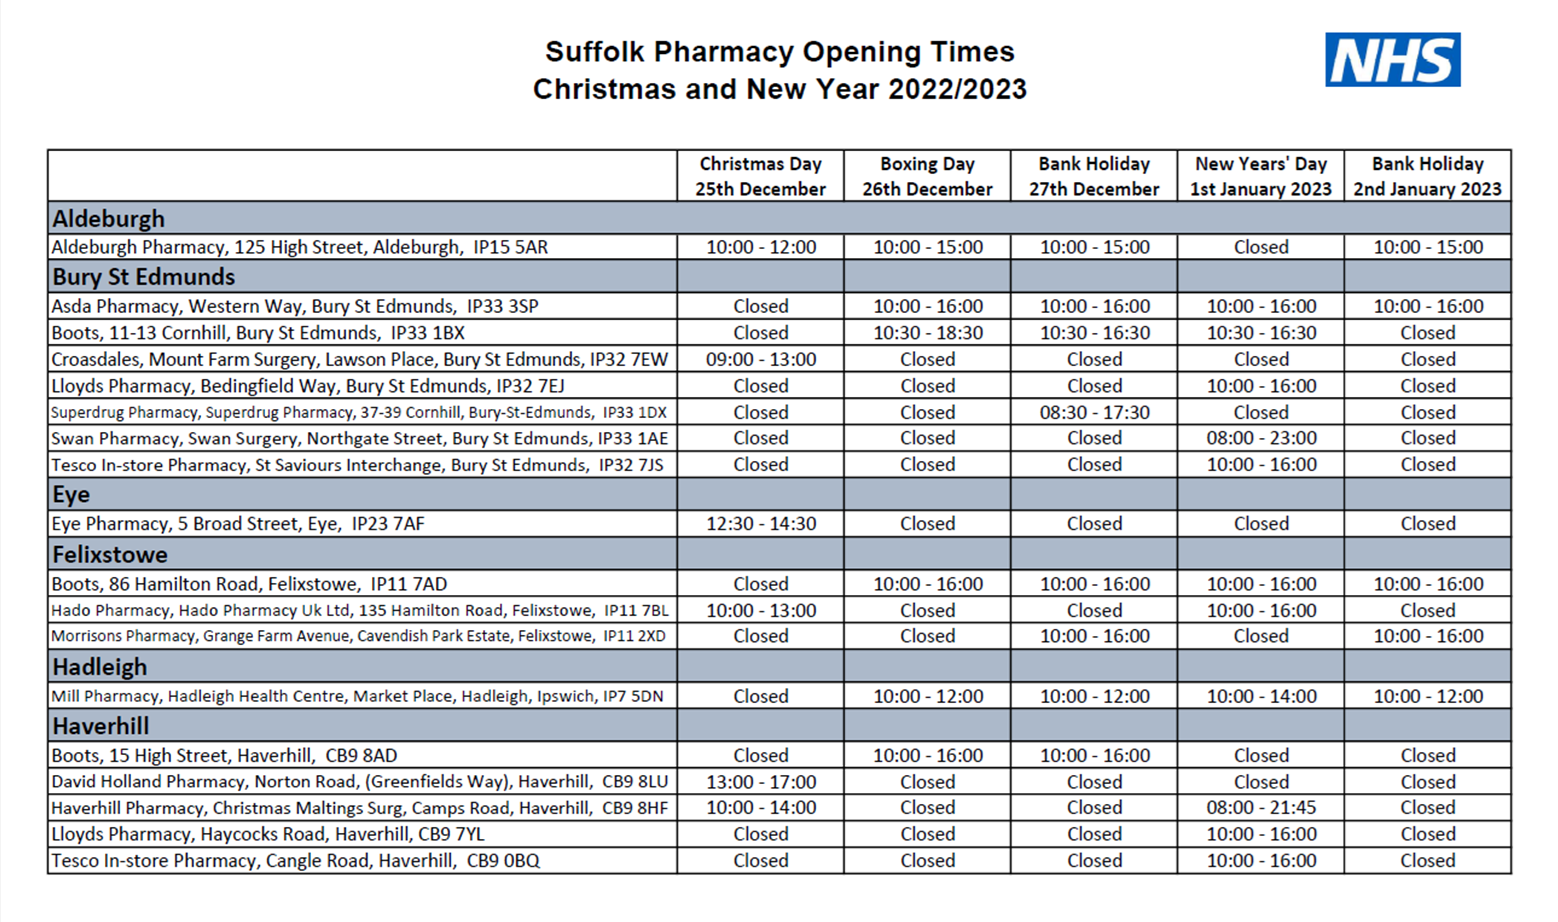 Pharmacy Opening Times - Christmas and New Year 2022-23